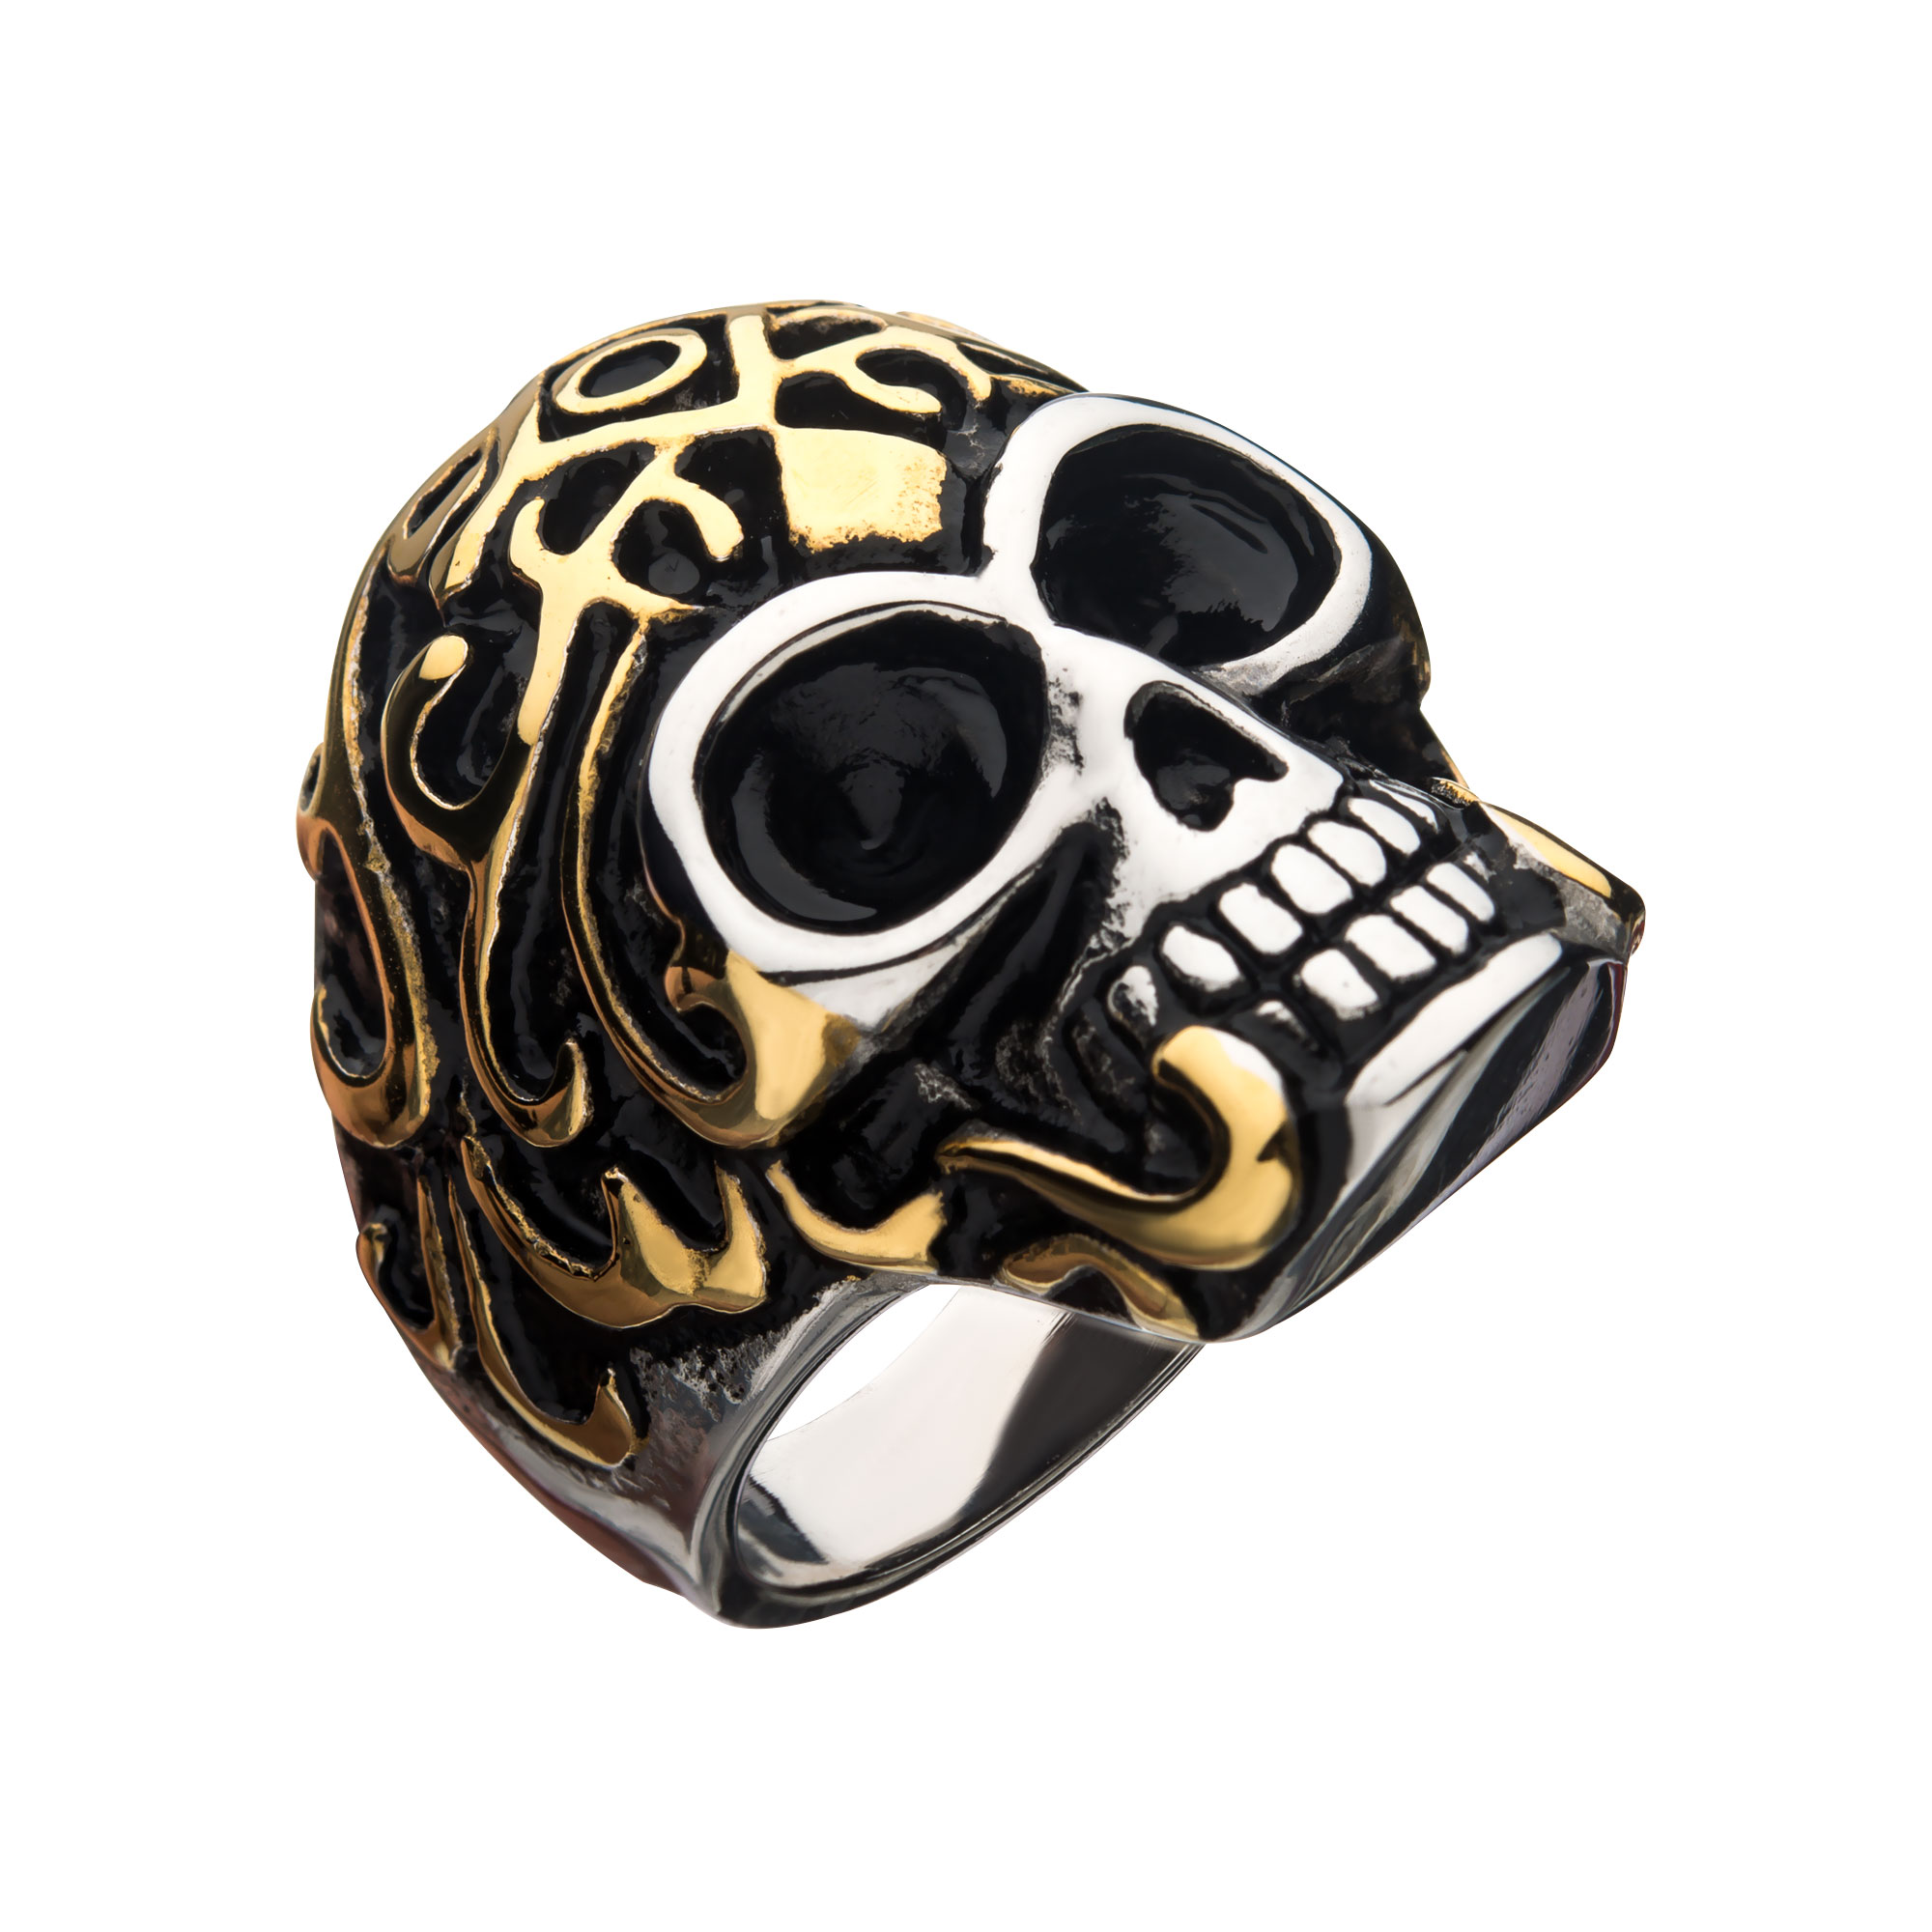 Oxidized Stainless Steel & Gold IP Skull Ring Enchanted Jewelry Plainfield, CT